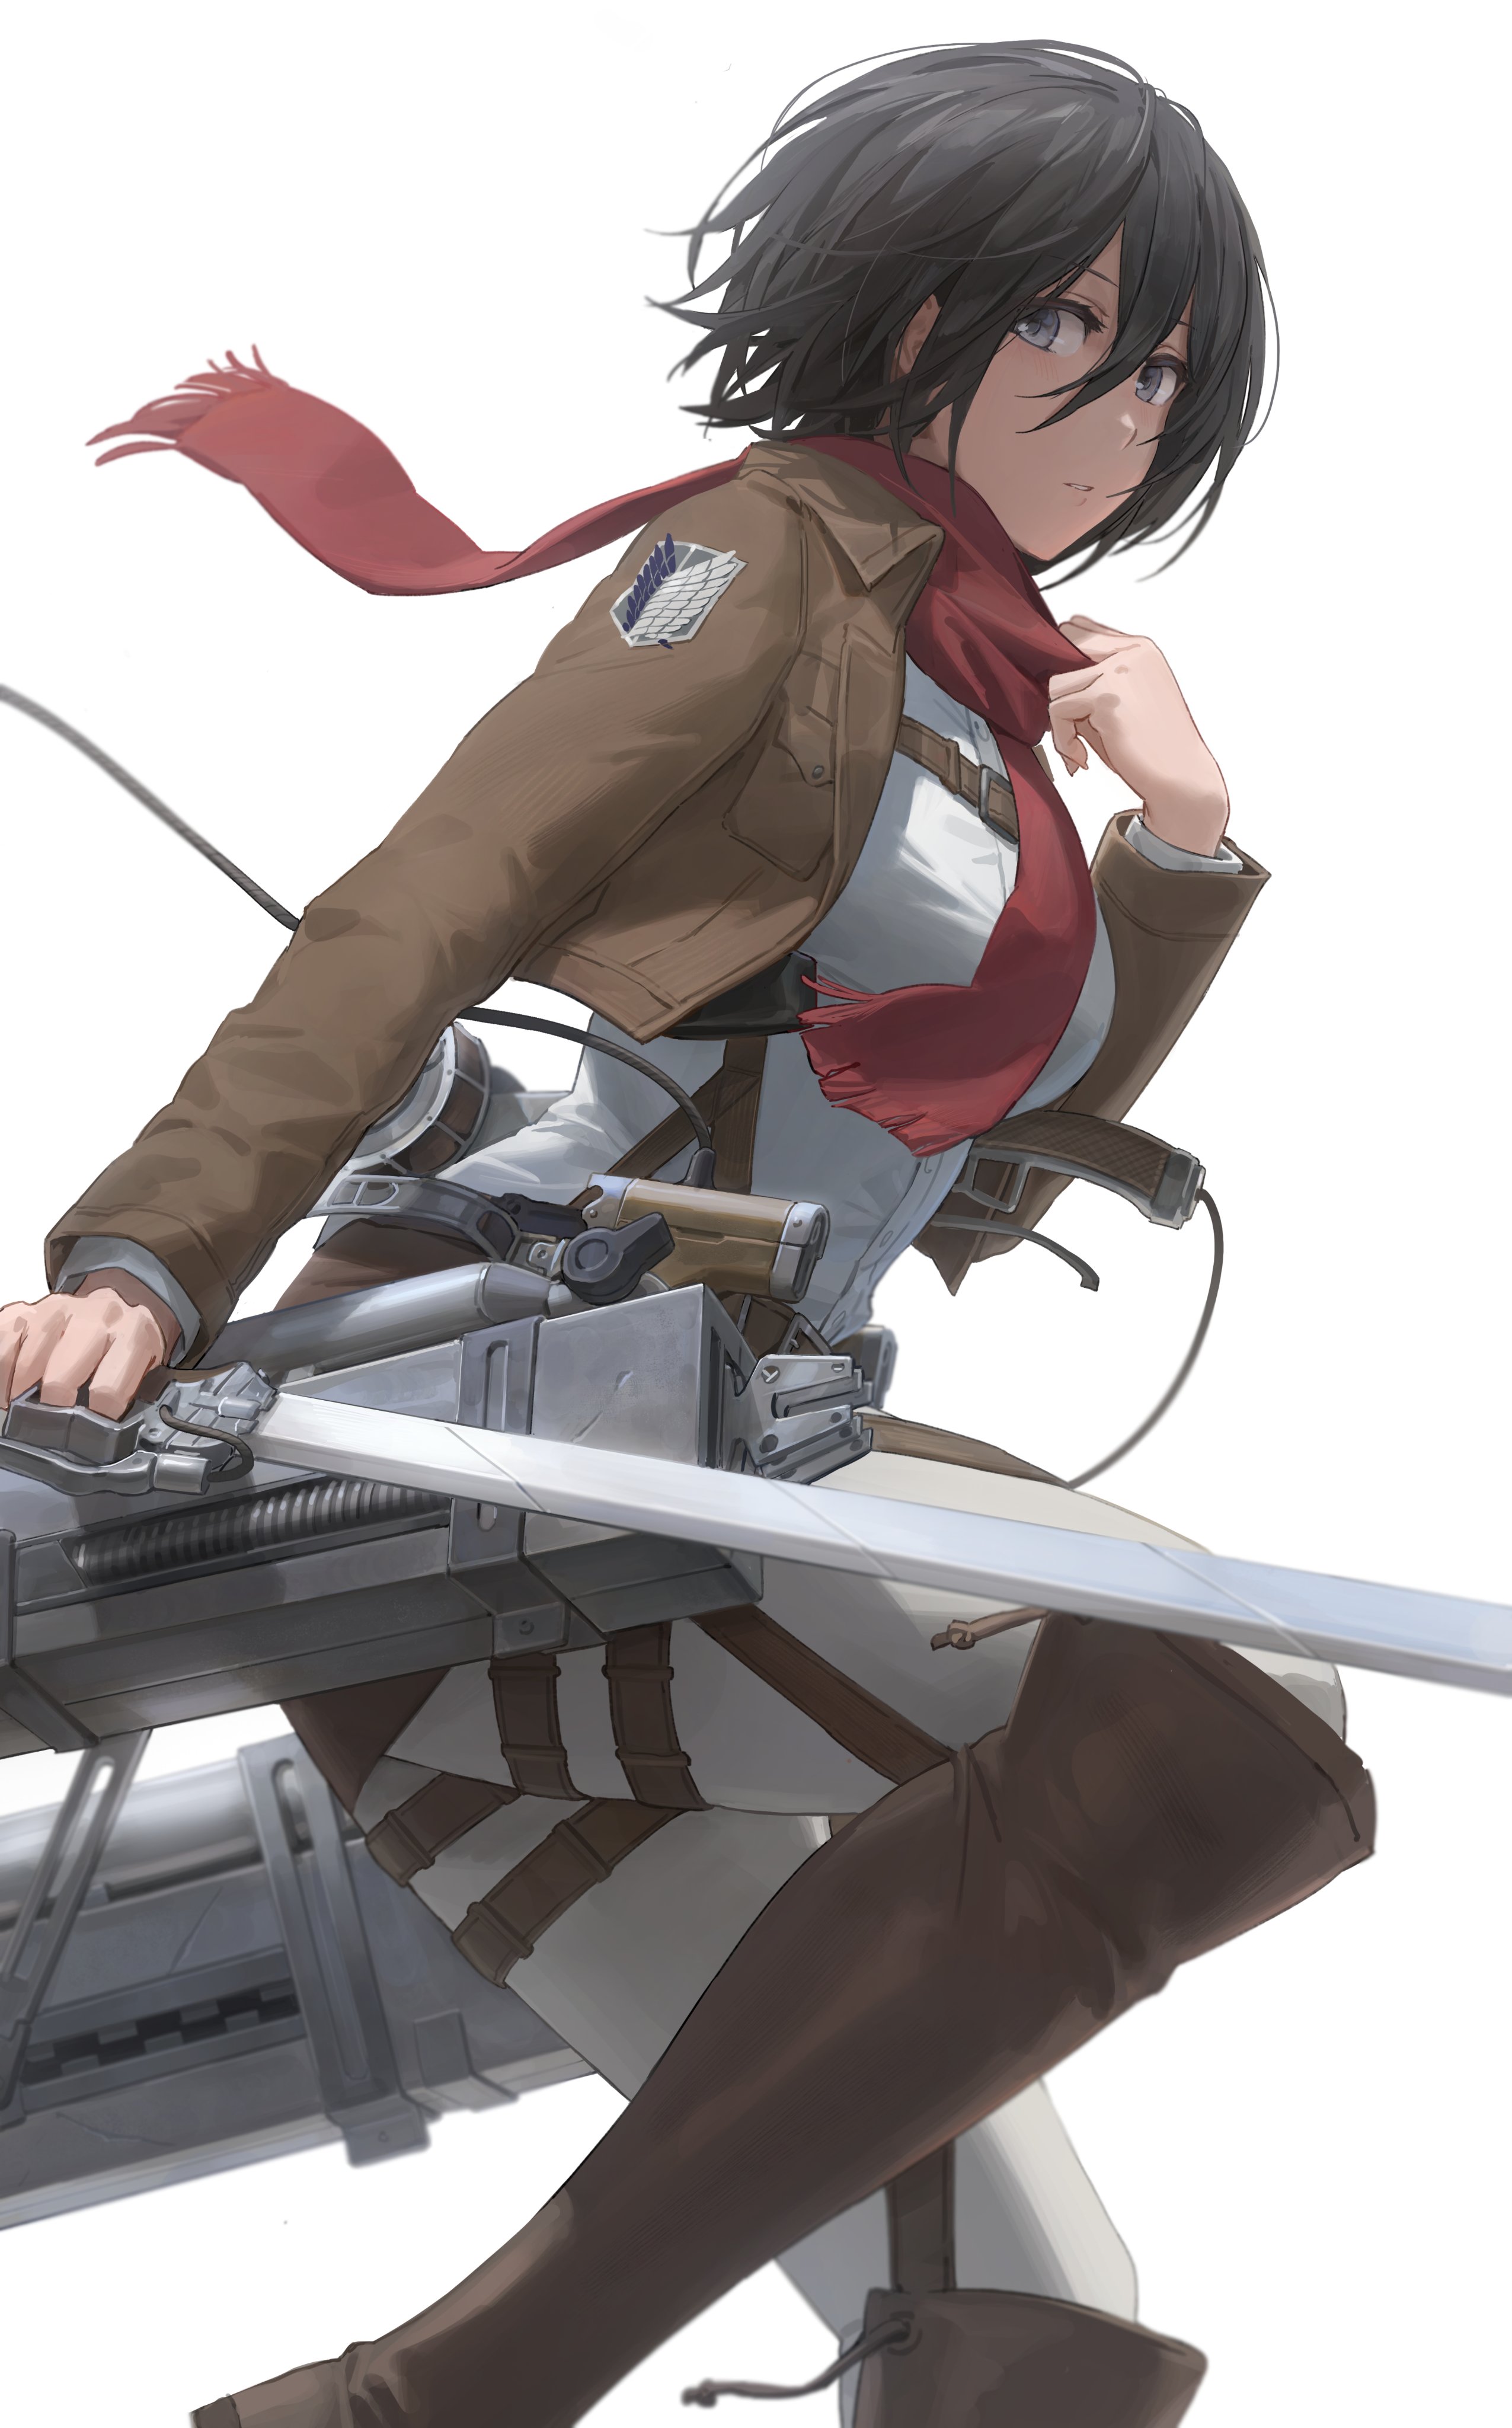 Shingeki No Kyojin Brown Boots 2D Women With Swords Scarf Hair In Face Black Hair Short Hair Parted  2551x4096